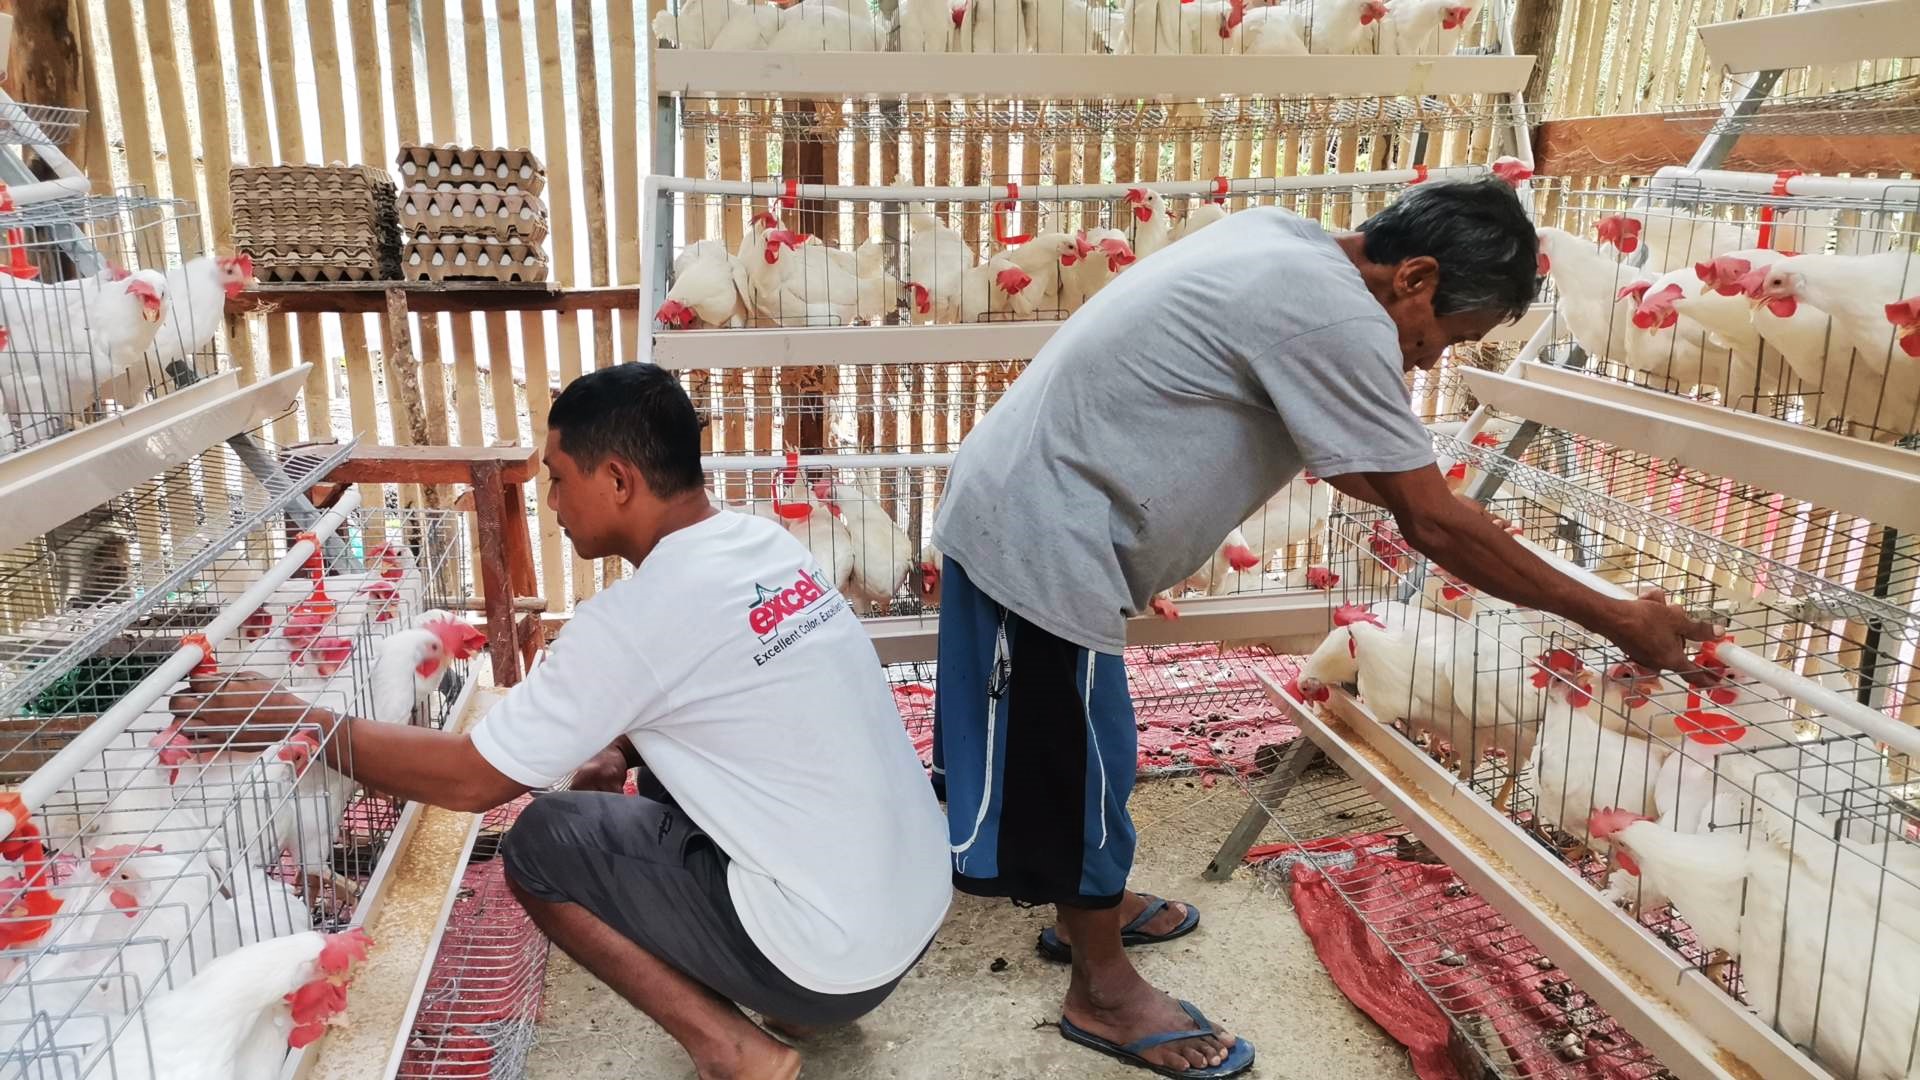 SAAD Bohol FAs report chicken farming growth with Php 52K gross income